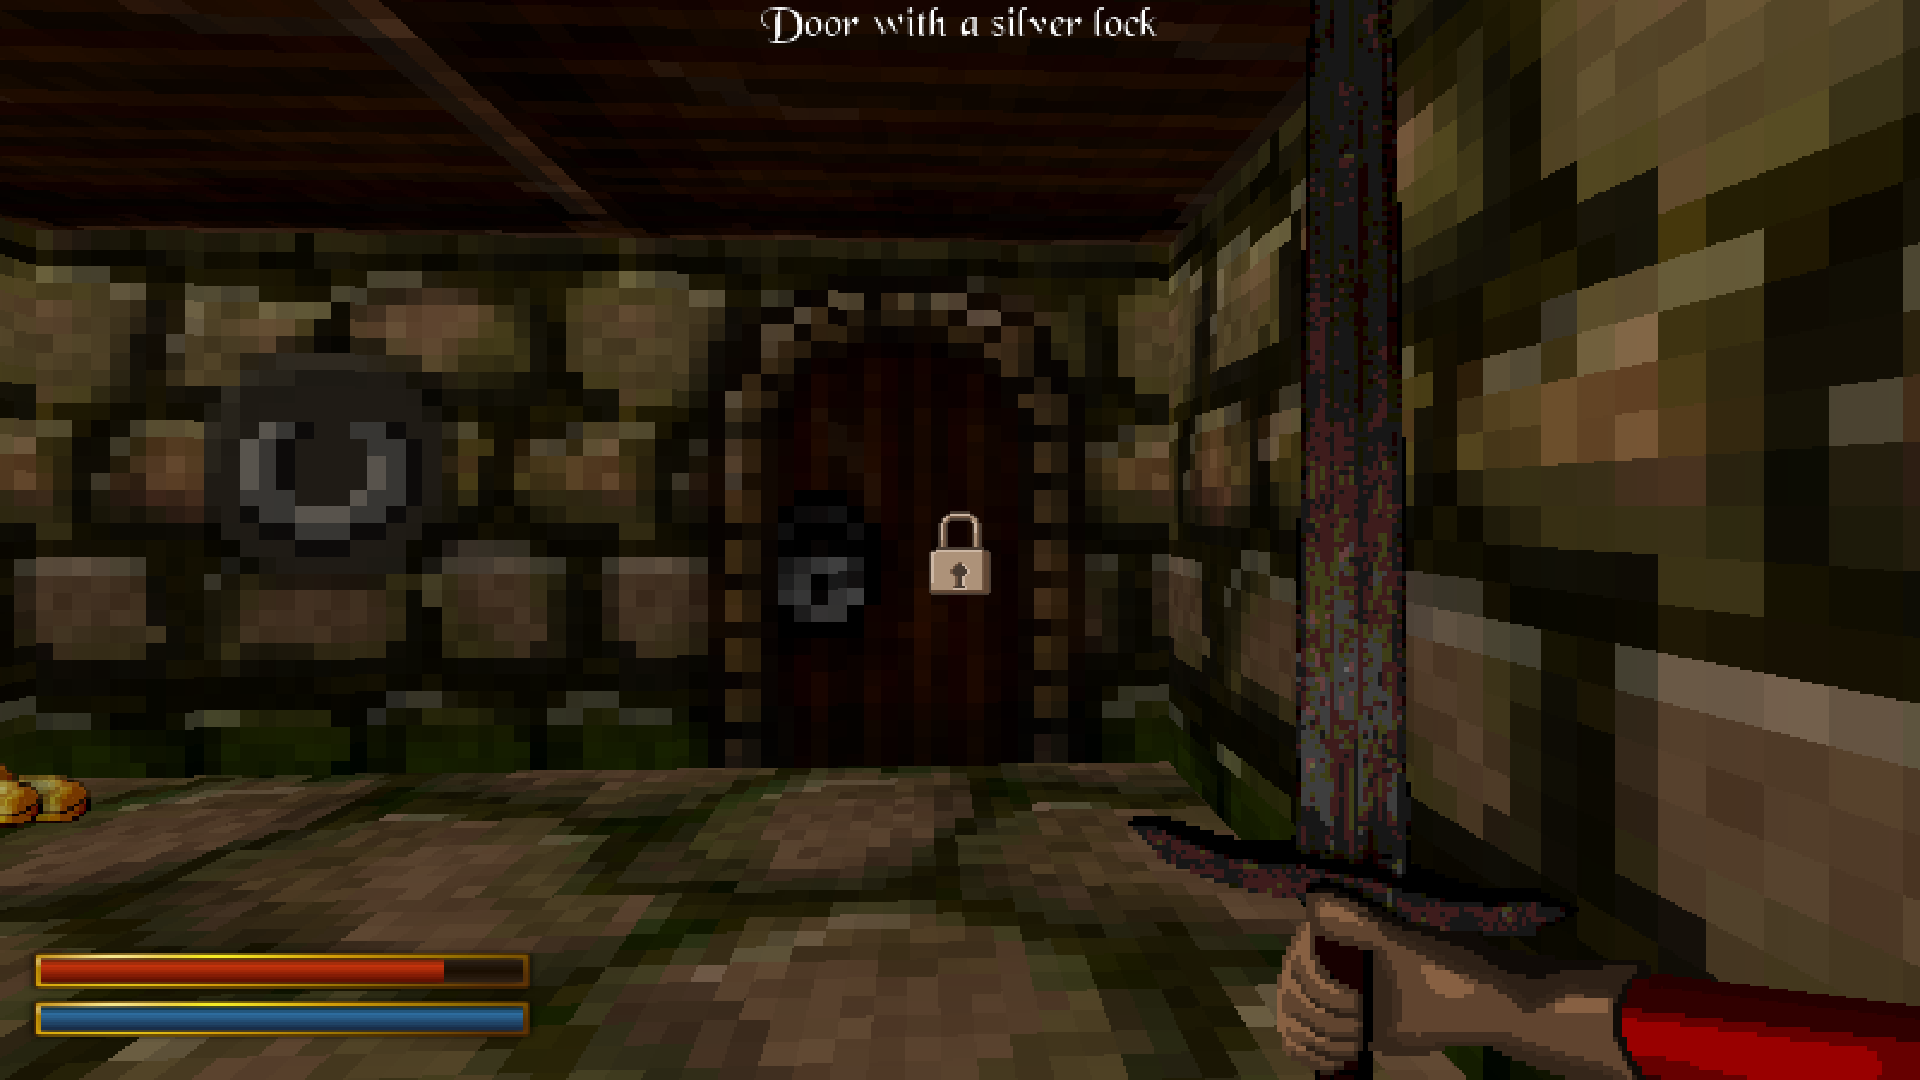 A screenshot of the game that shows a wooden door with a silver lock. The hint text says 'Door with a silver lock'.